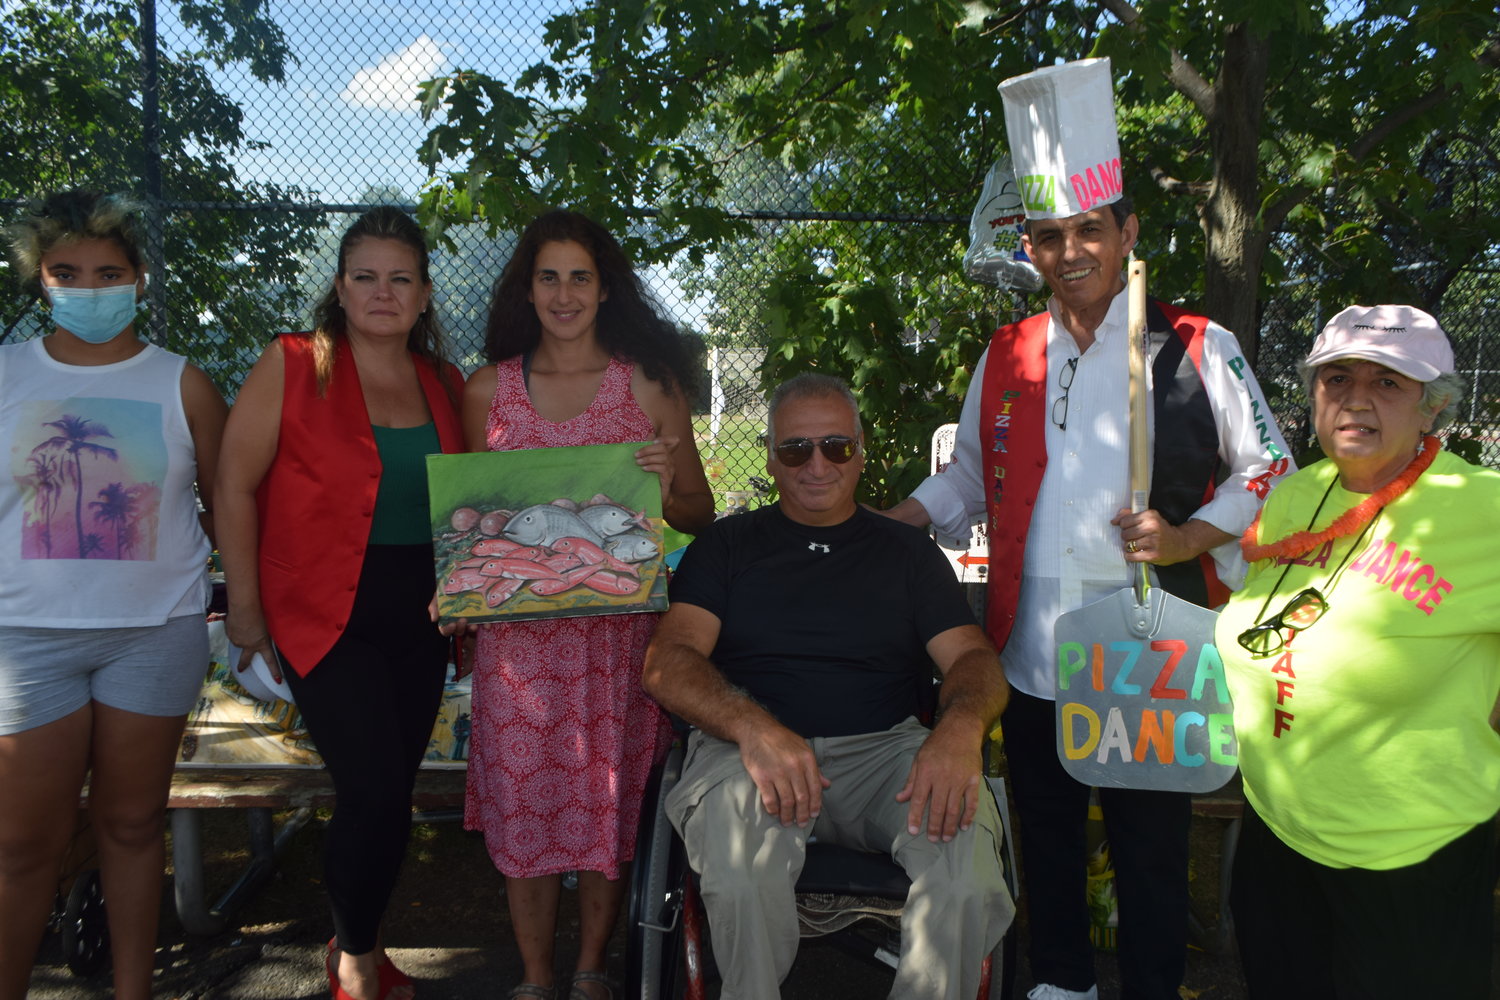 Crafts and paintings were on sale at Inwood Day  and from left Isabella Iaseboli, Kathy Leon, Valeria and Massimo Perella, Tony Modica and Mariarosa Guzzardi.